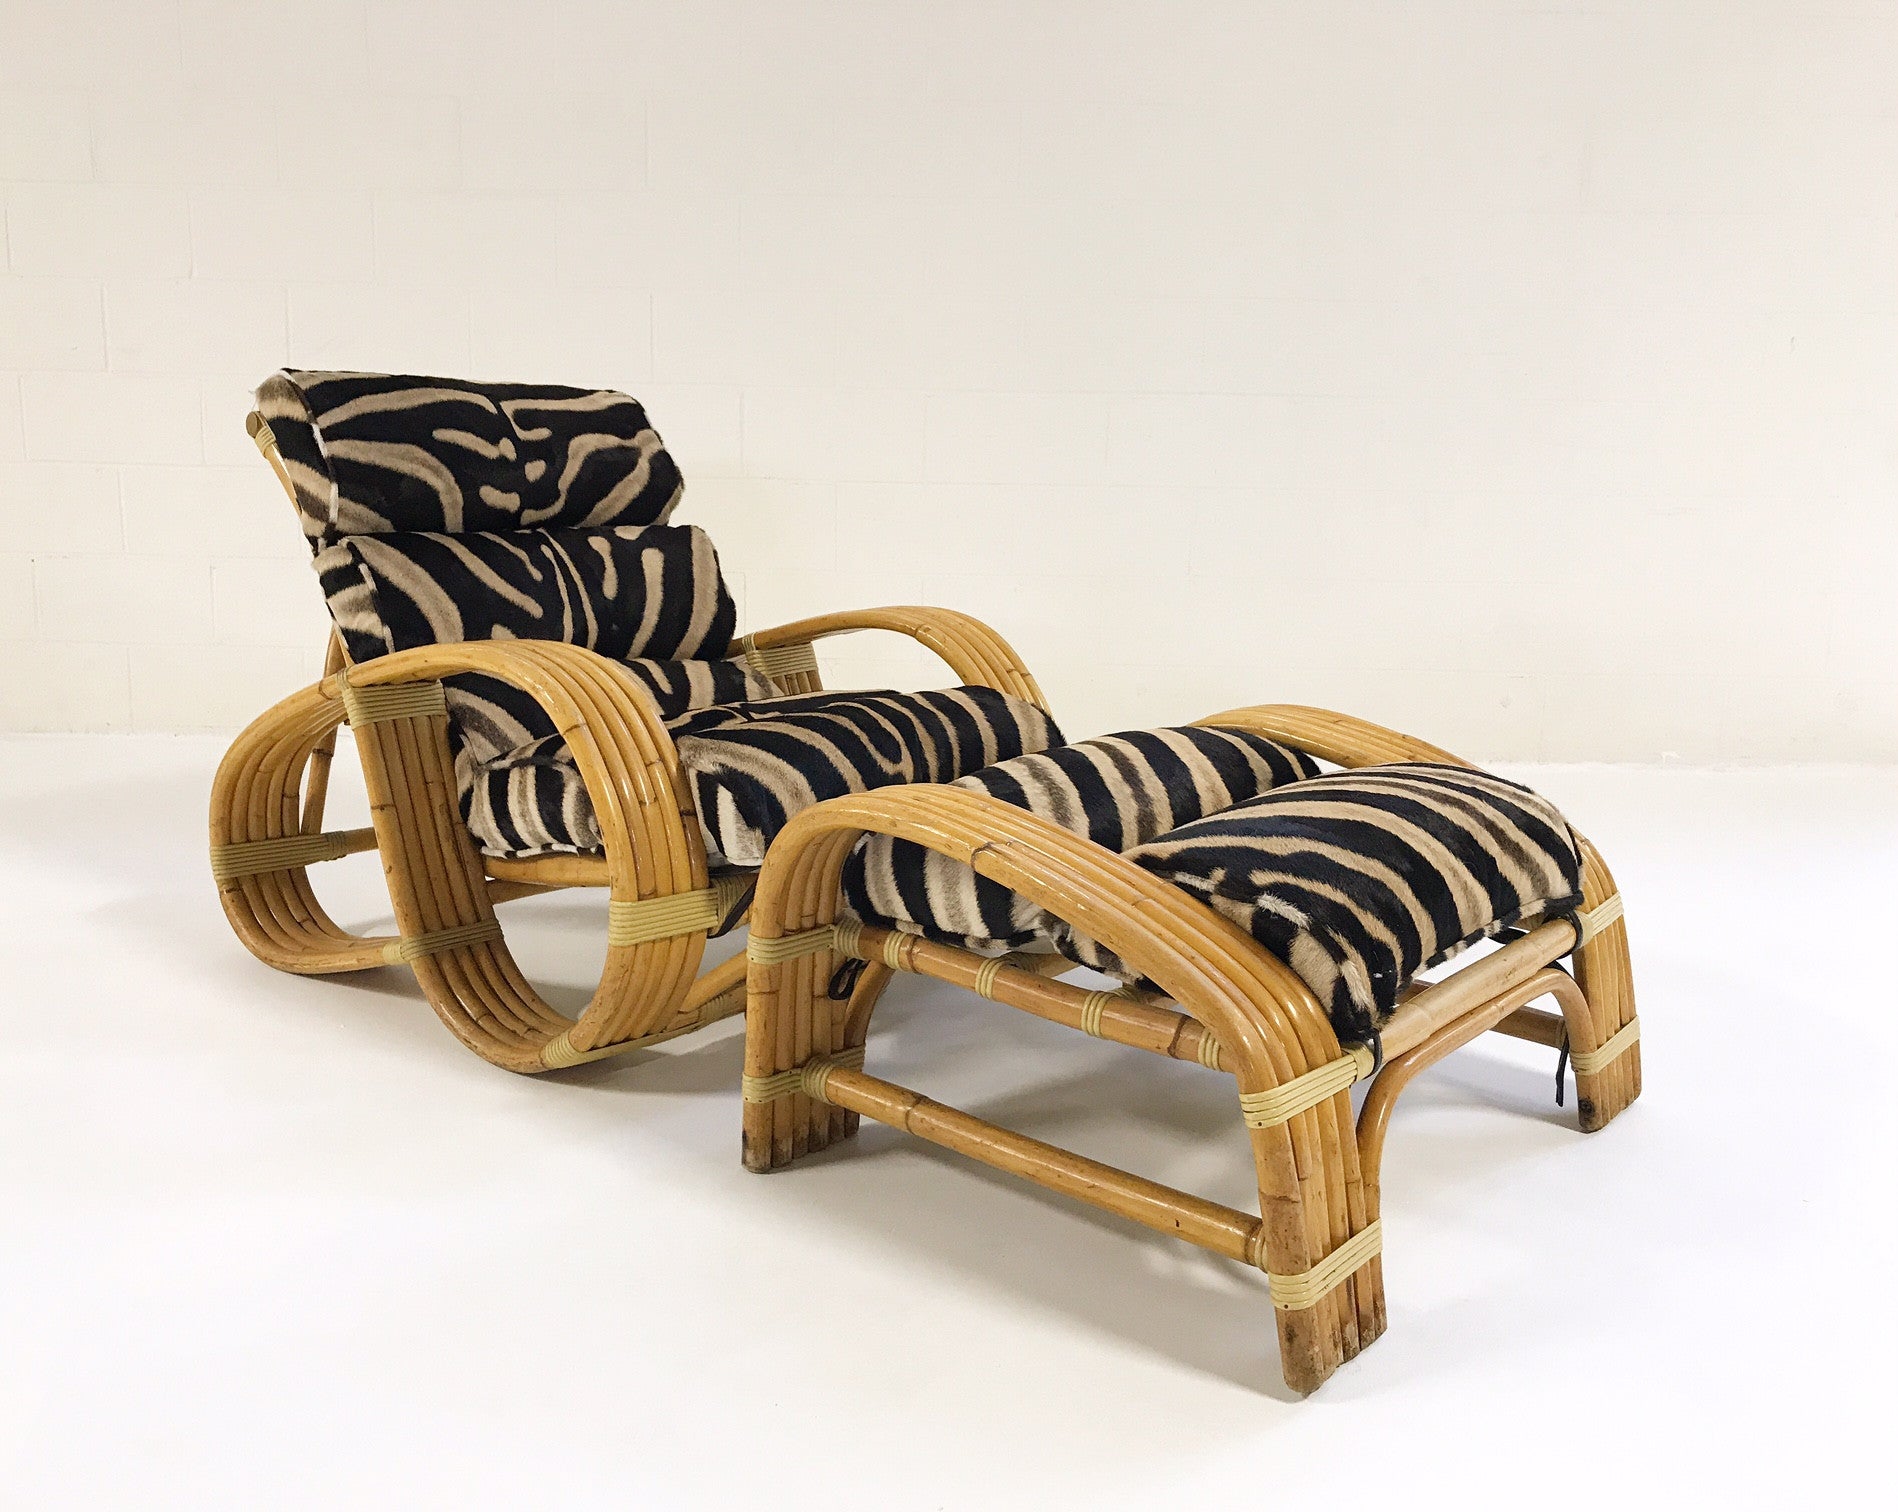 Five-Strand Rattan Lounge Chair & Ottoman with Zebra Hide Cushions - FORSYTH